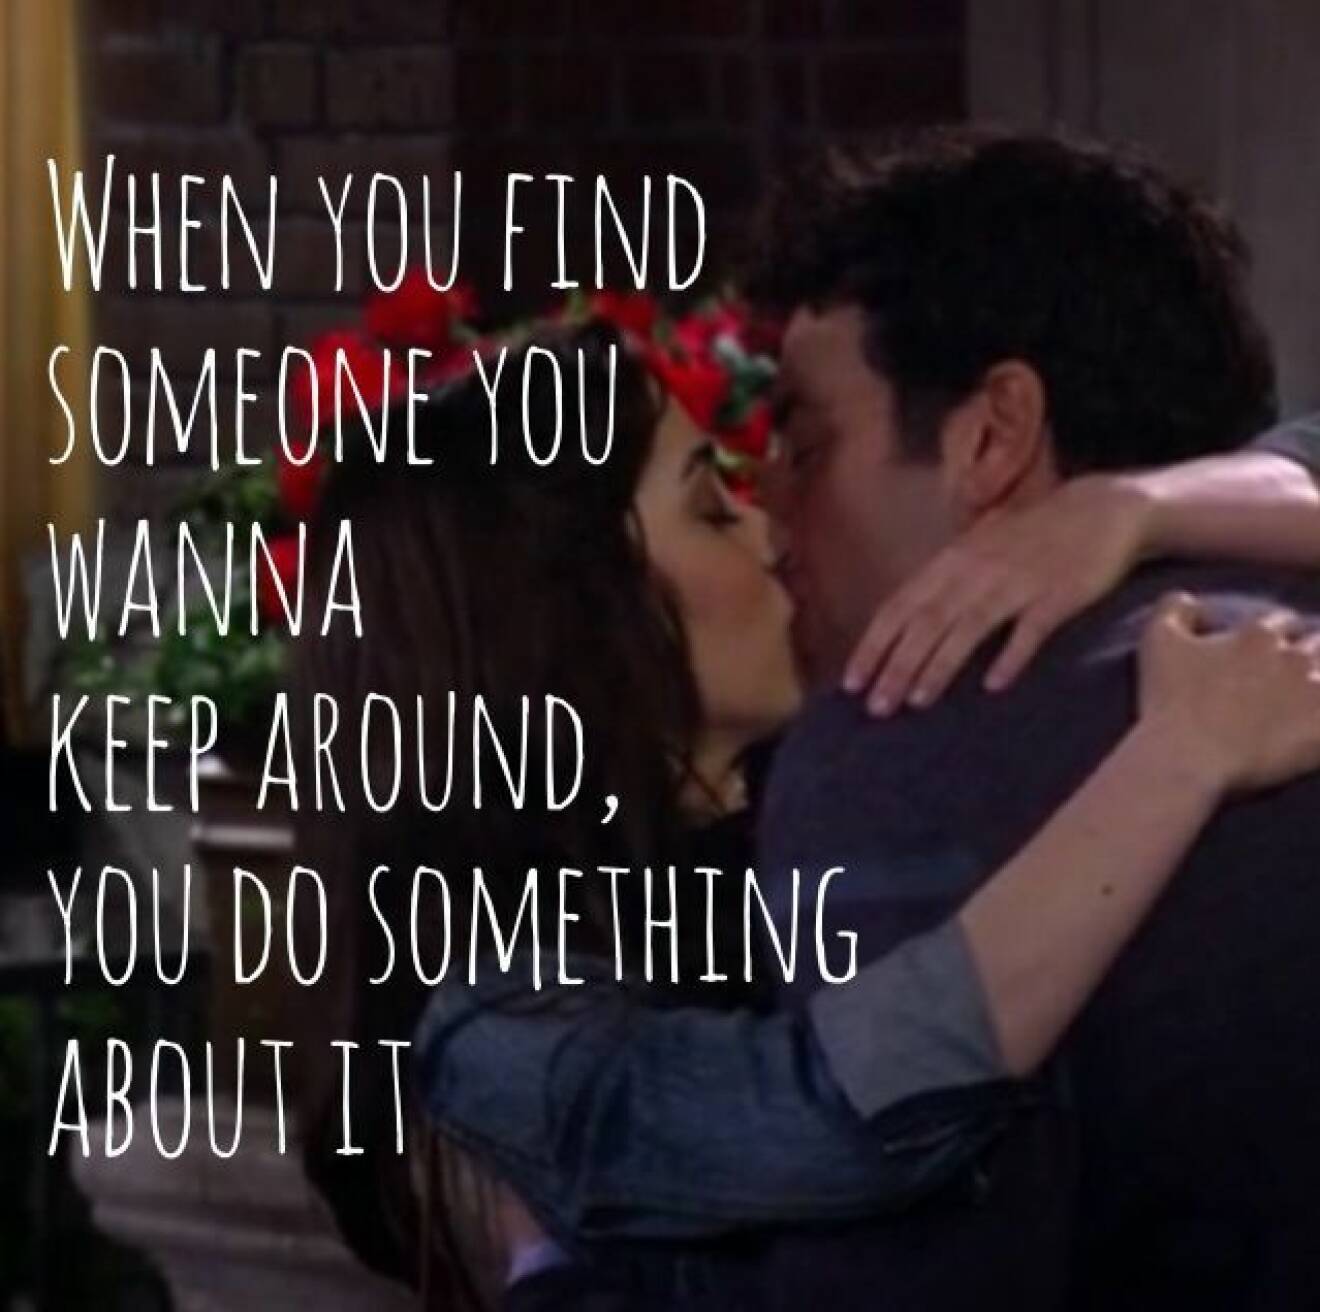 Bild med texten " When you find someone you wanna keep around, you do something about it"